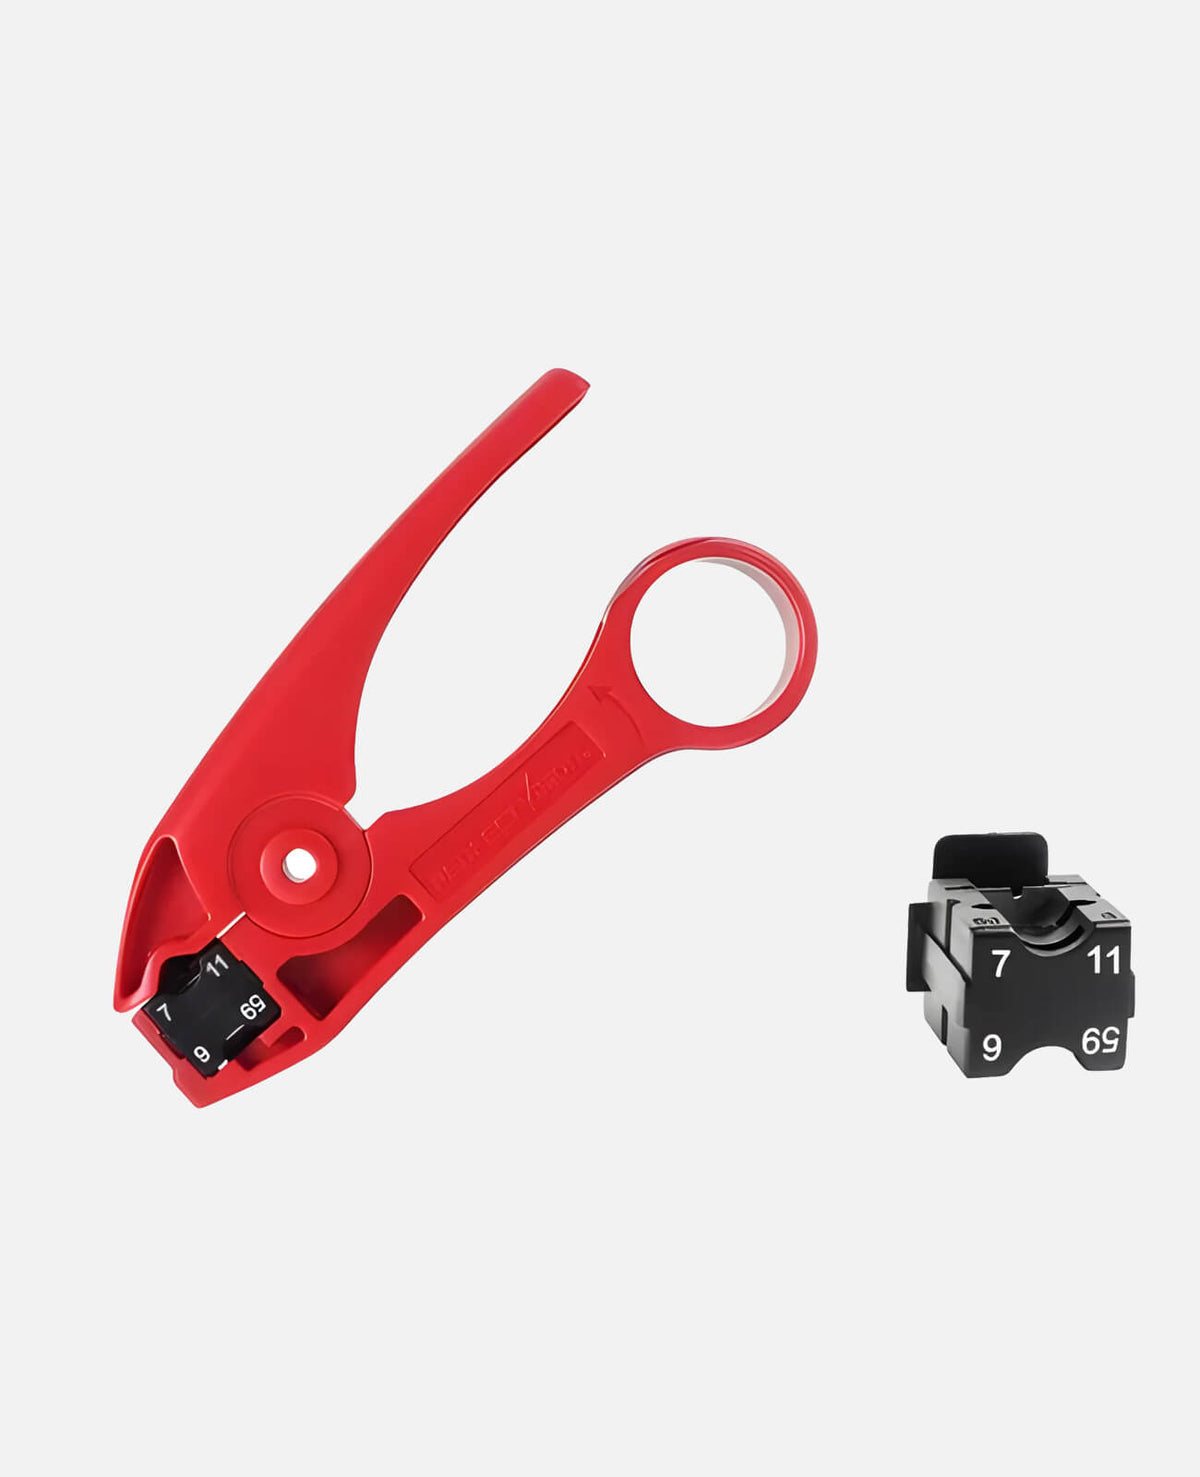 Coax Cable Stripper for RG59/6/11/7, w/RG59/6/11/7 Blade,Red (PV1596250)